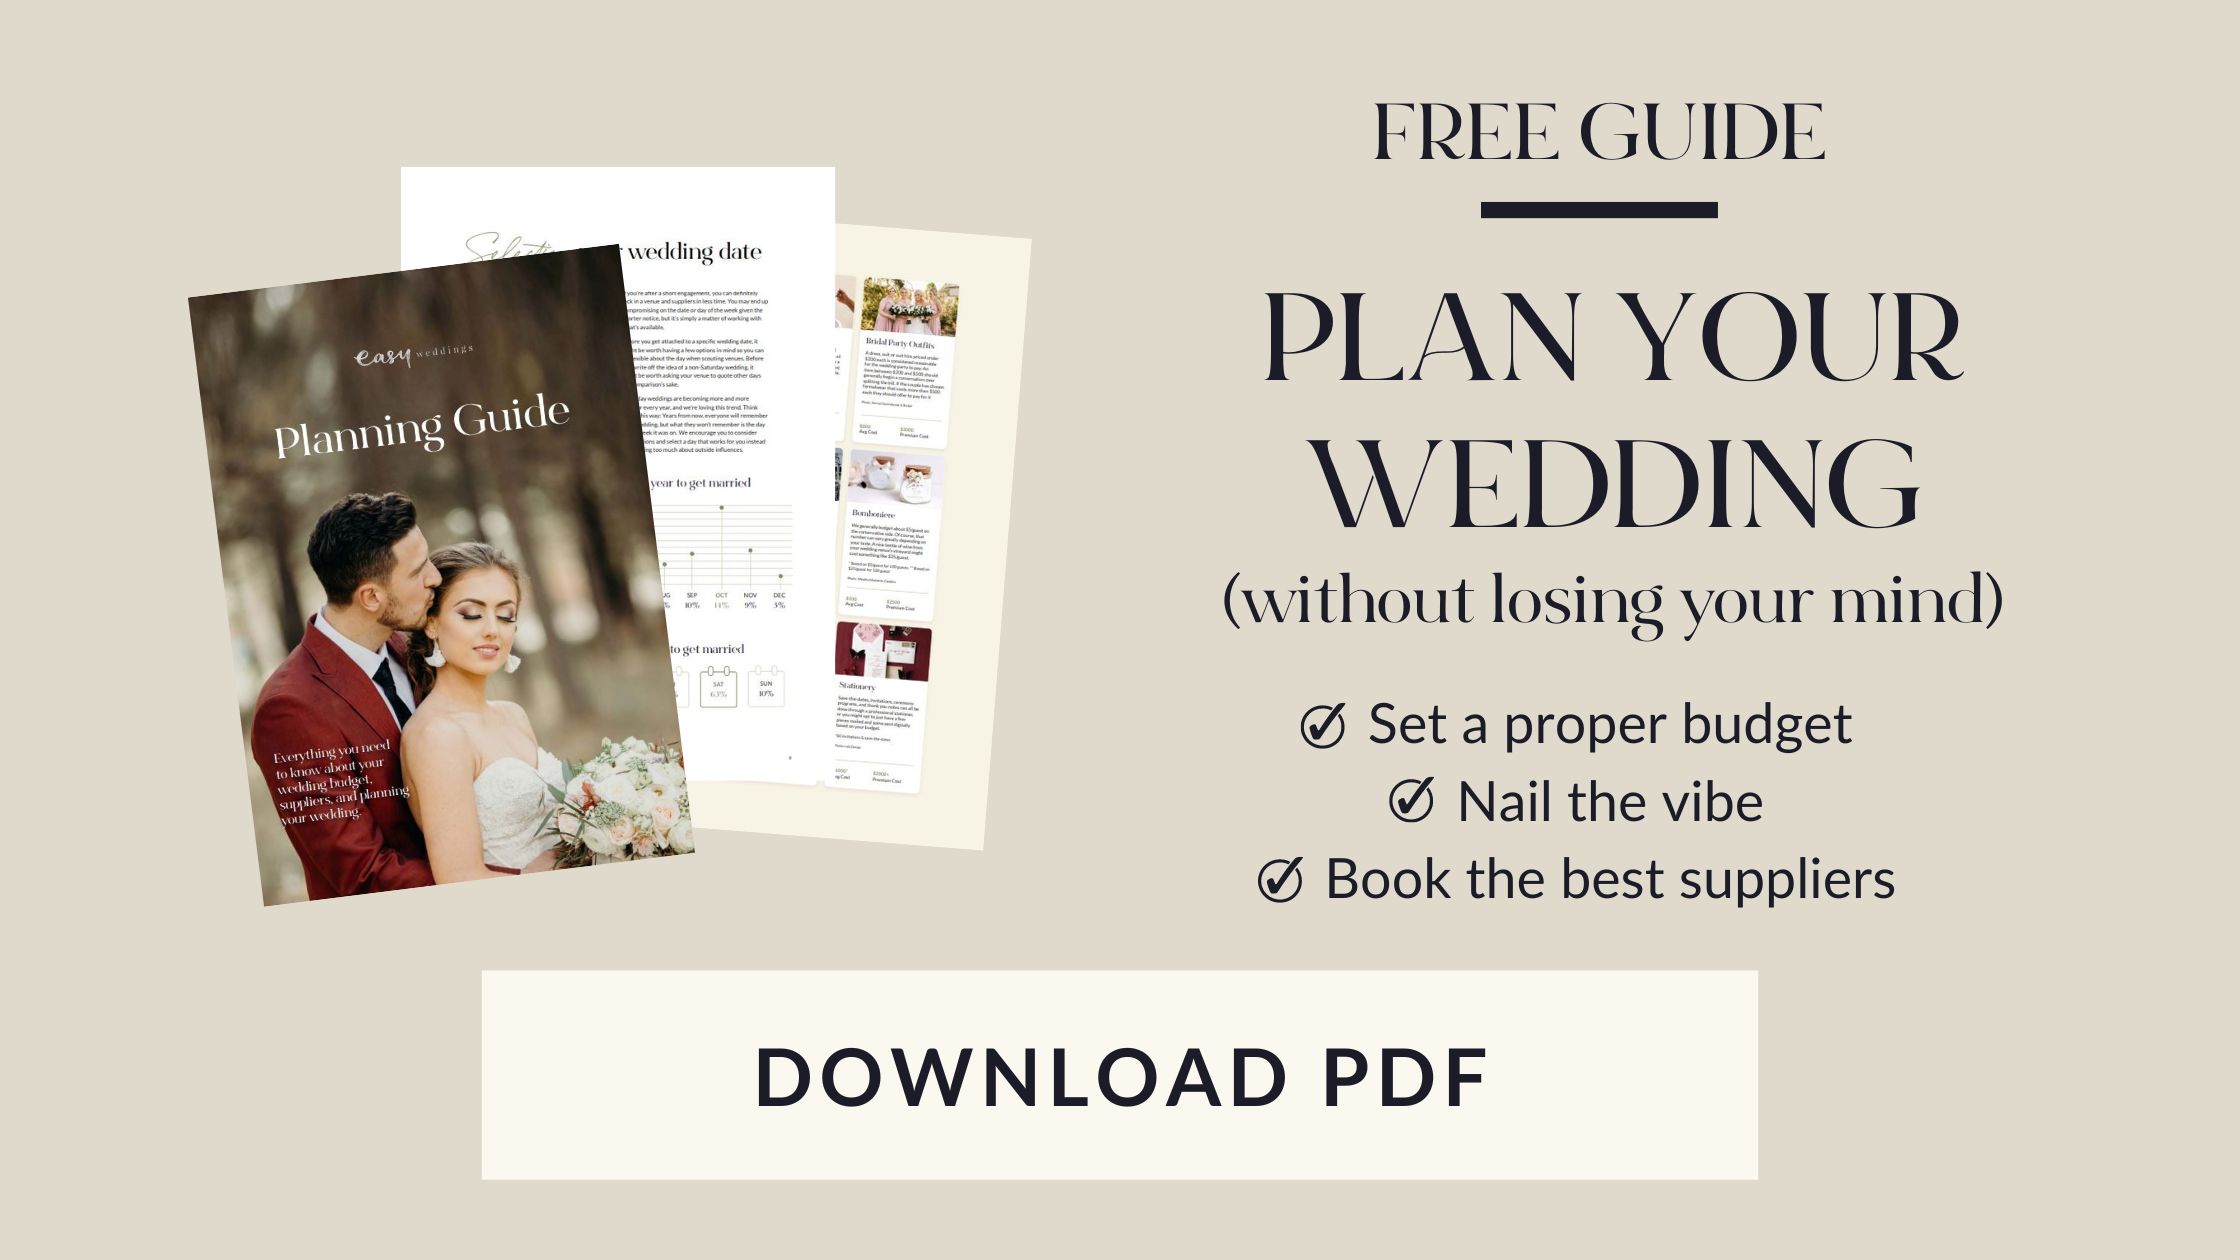 Easy Weddings planning guide PDF free download printable guide for couples